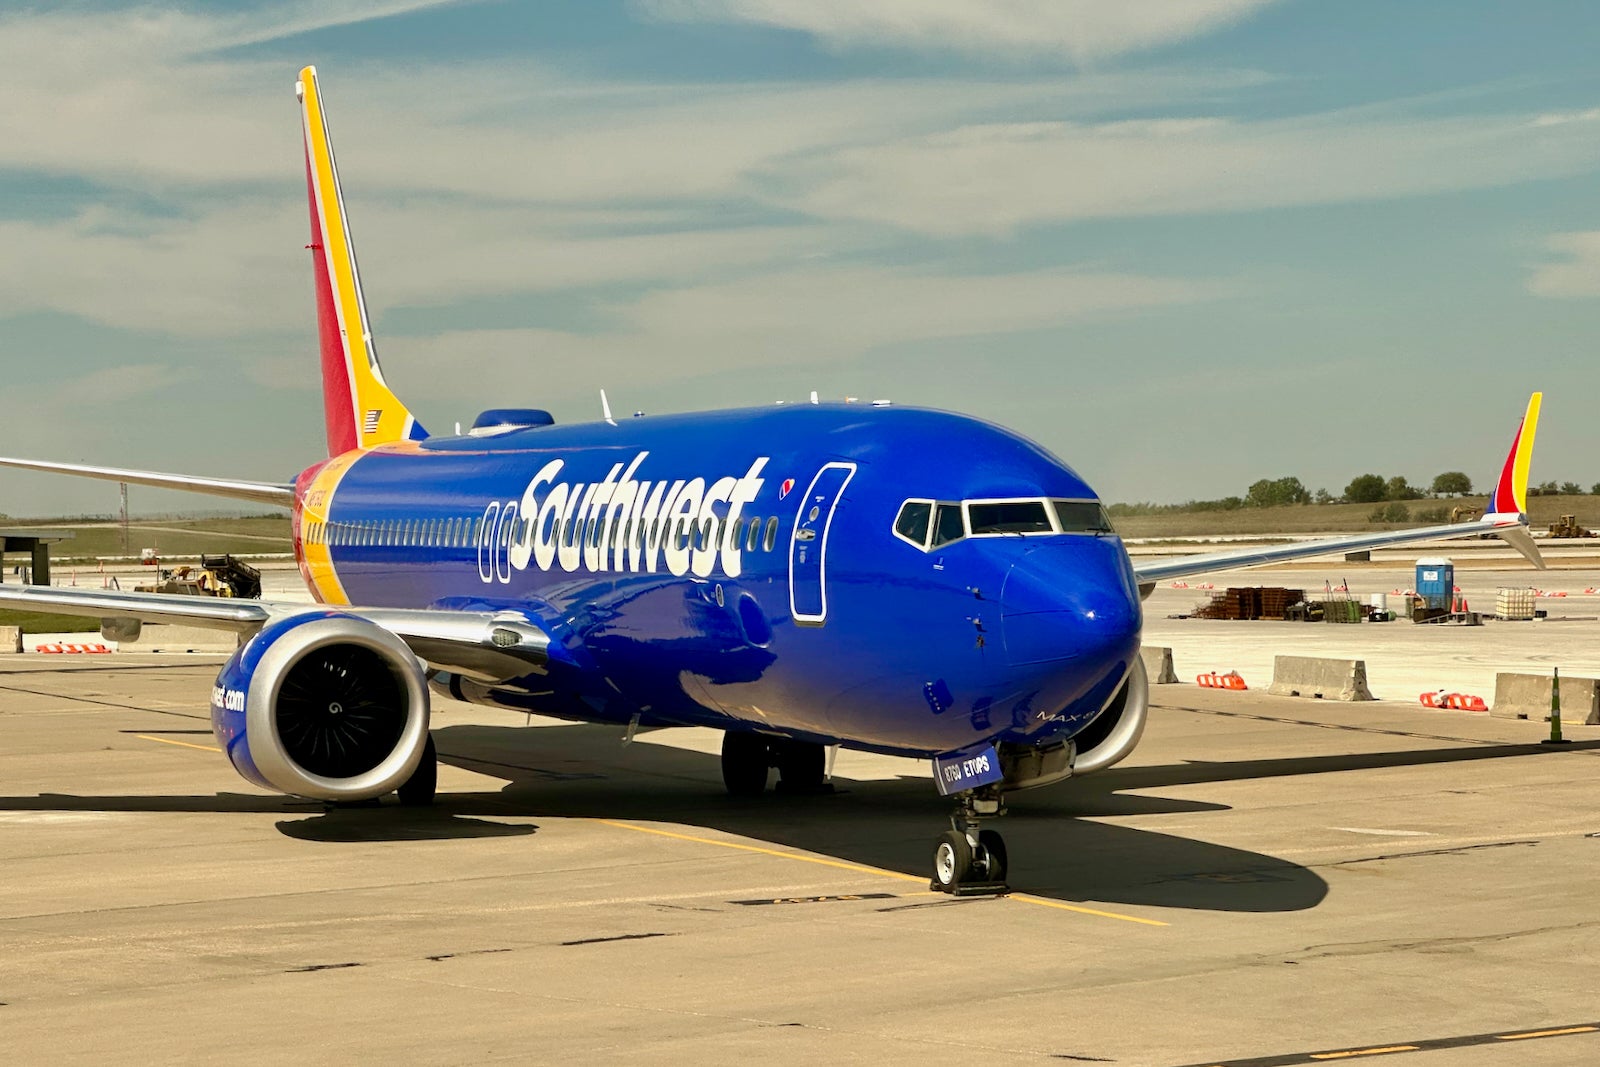 Southwest’s operation continues to meltdown as other airlines recover from major Christmas storm